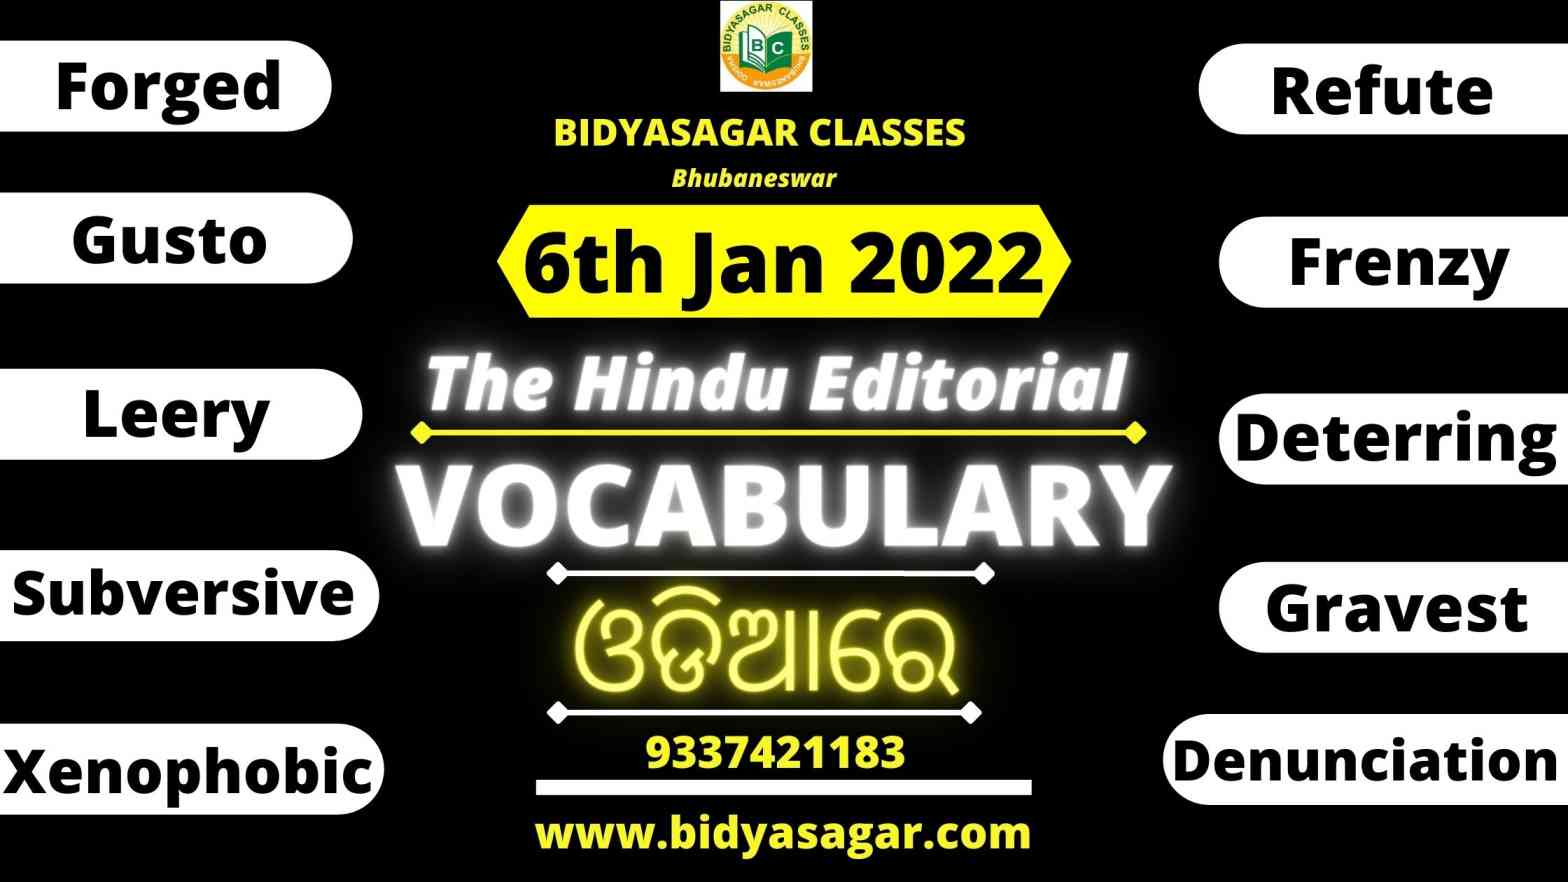 The Hindu Editorial Vocabulary of 6th January 2022